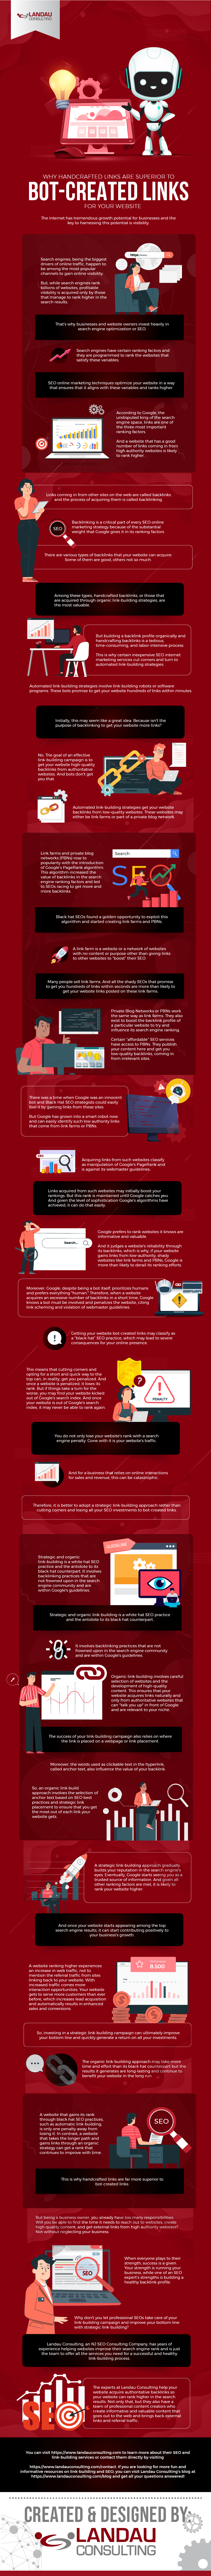 Why-Handcrafted-Links-Are-Superior-to-Bot-Created-Links-for-Your-Website-infographic-image